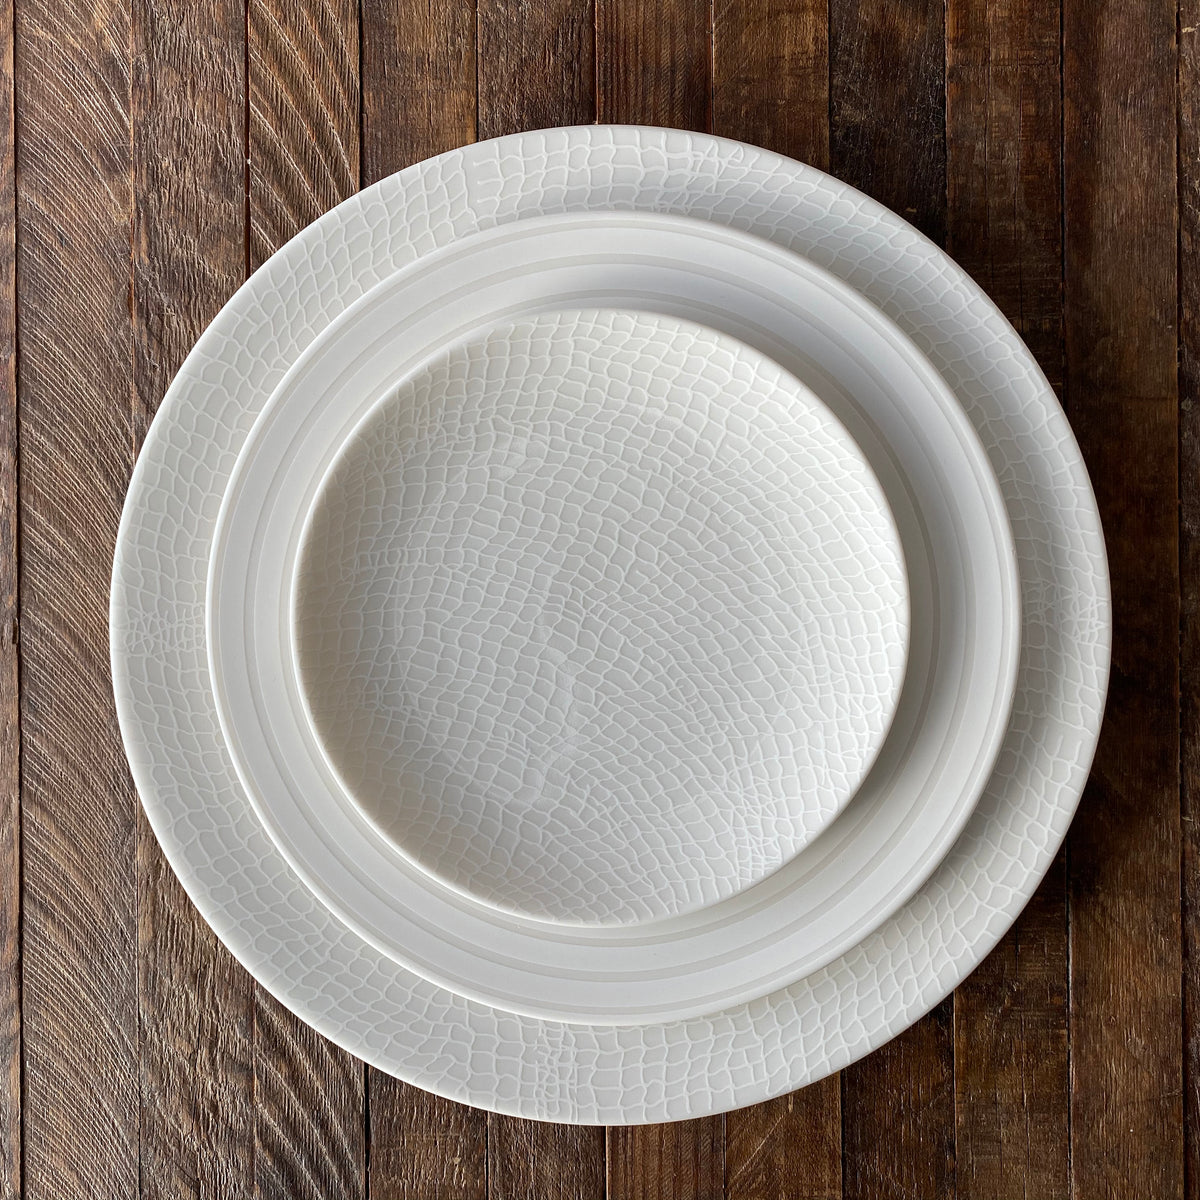 Two stacked Catch Small Plates by Caskata Artisanal Home made of high-fired porcelain with a textured, white design are placed on a wooden surface.